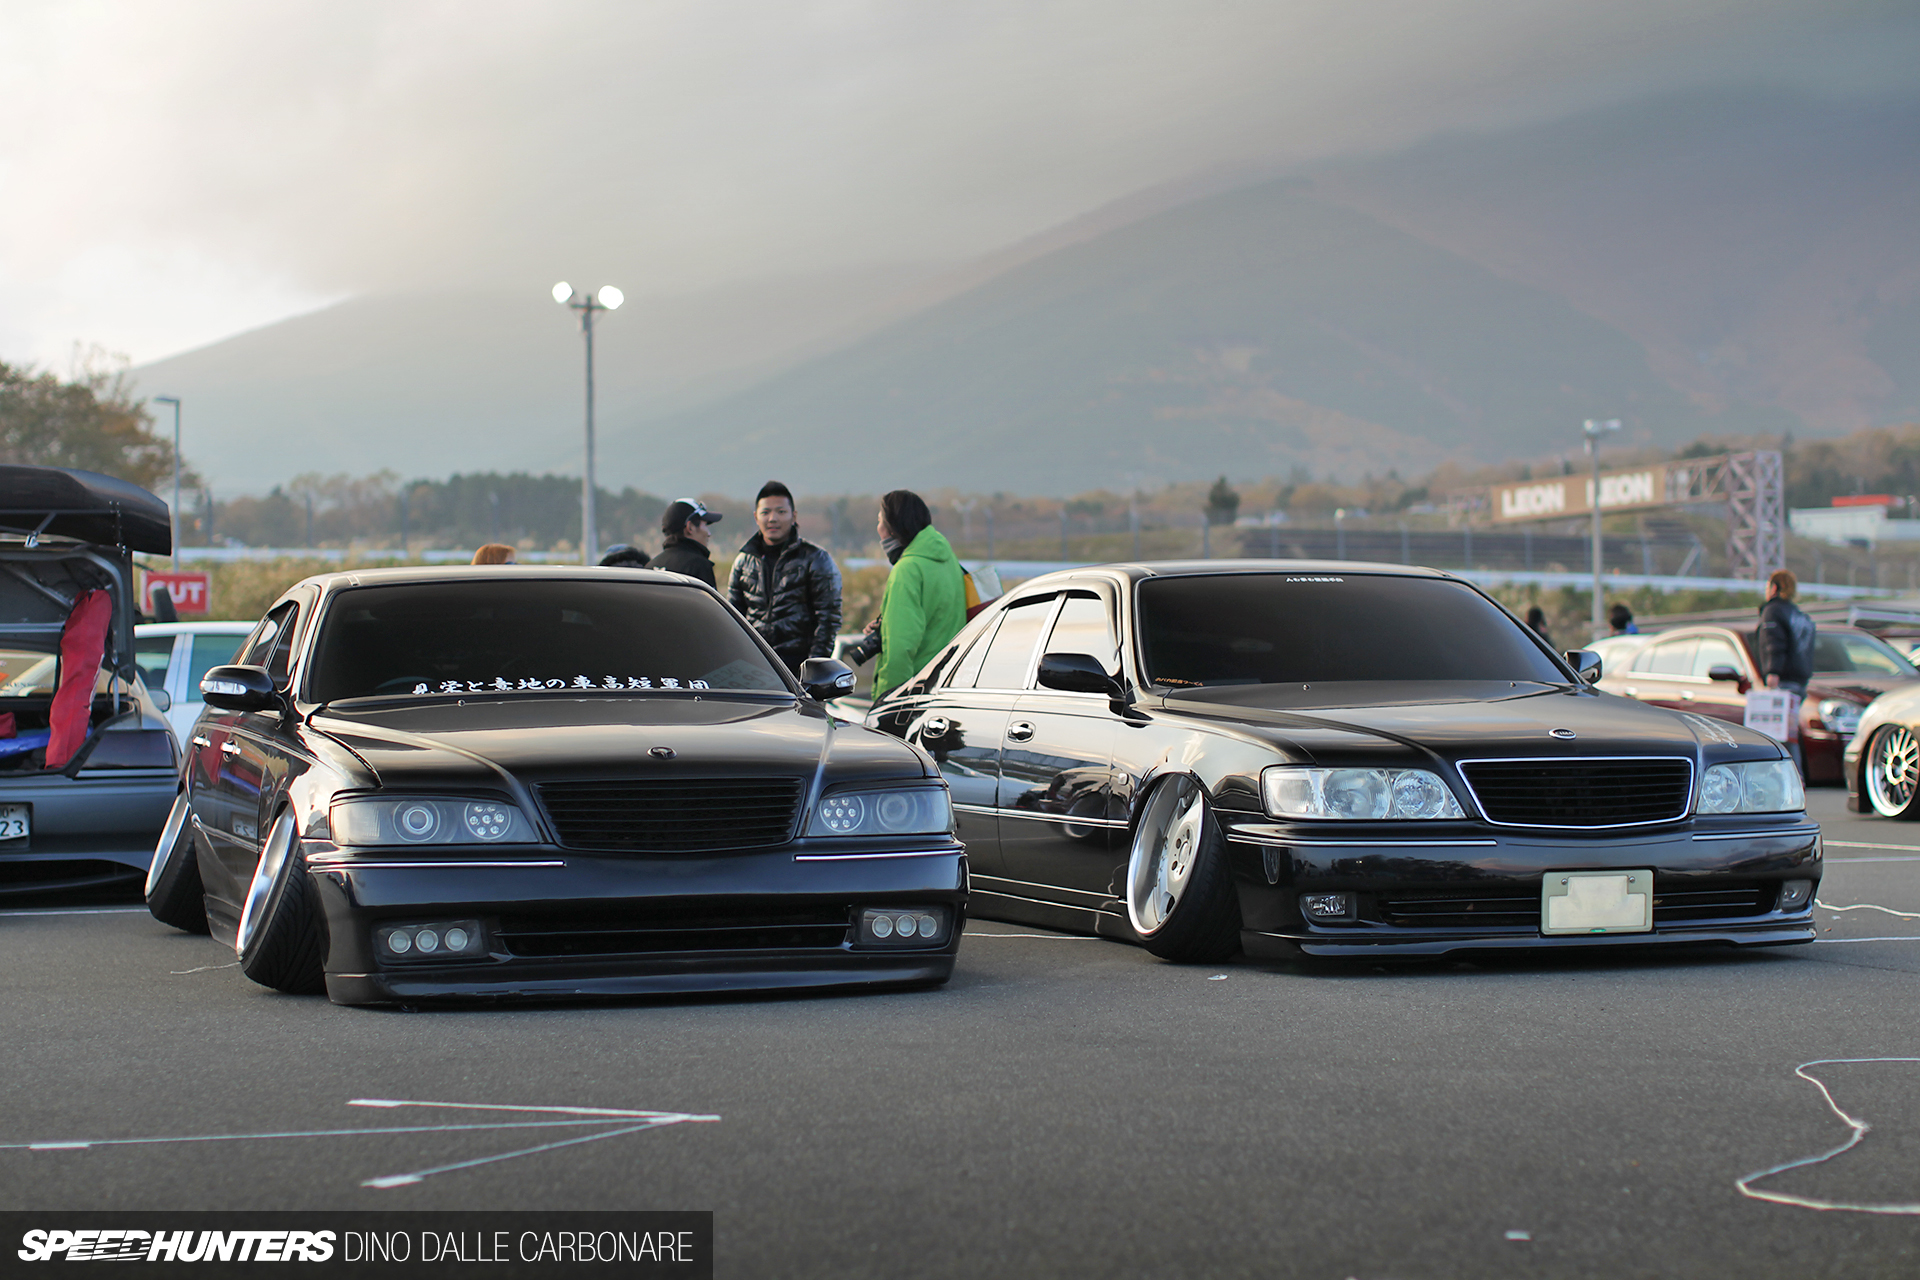 Stance Nation Hits Japan - Speedhunters